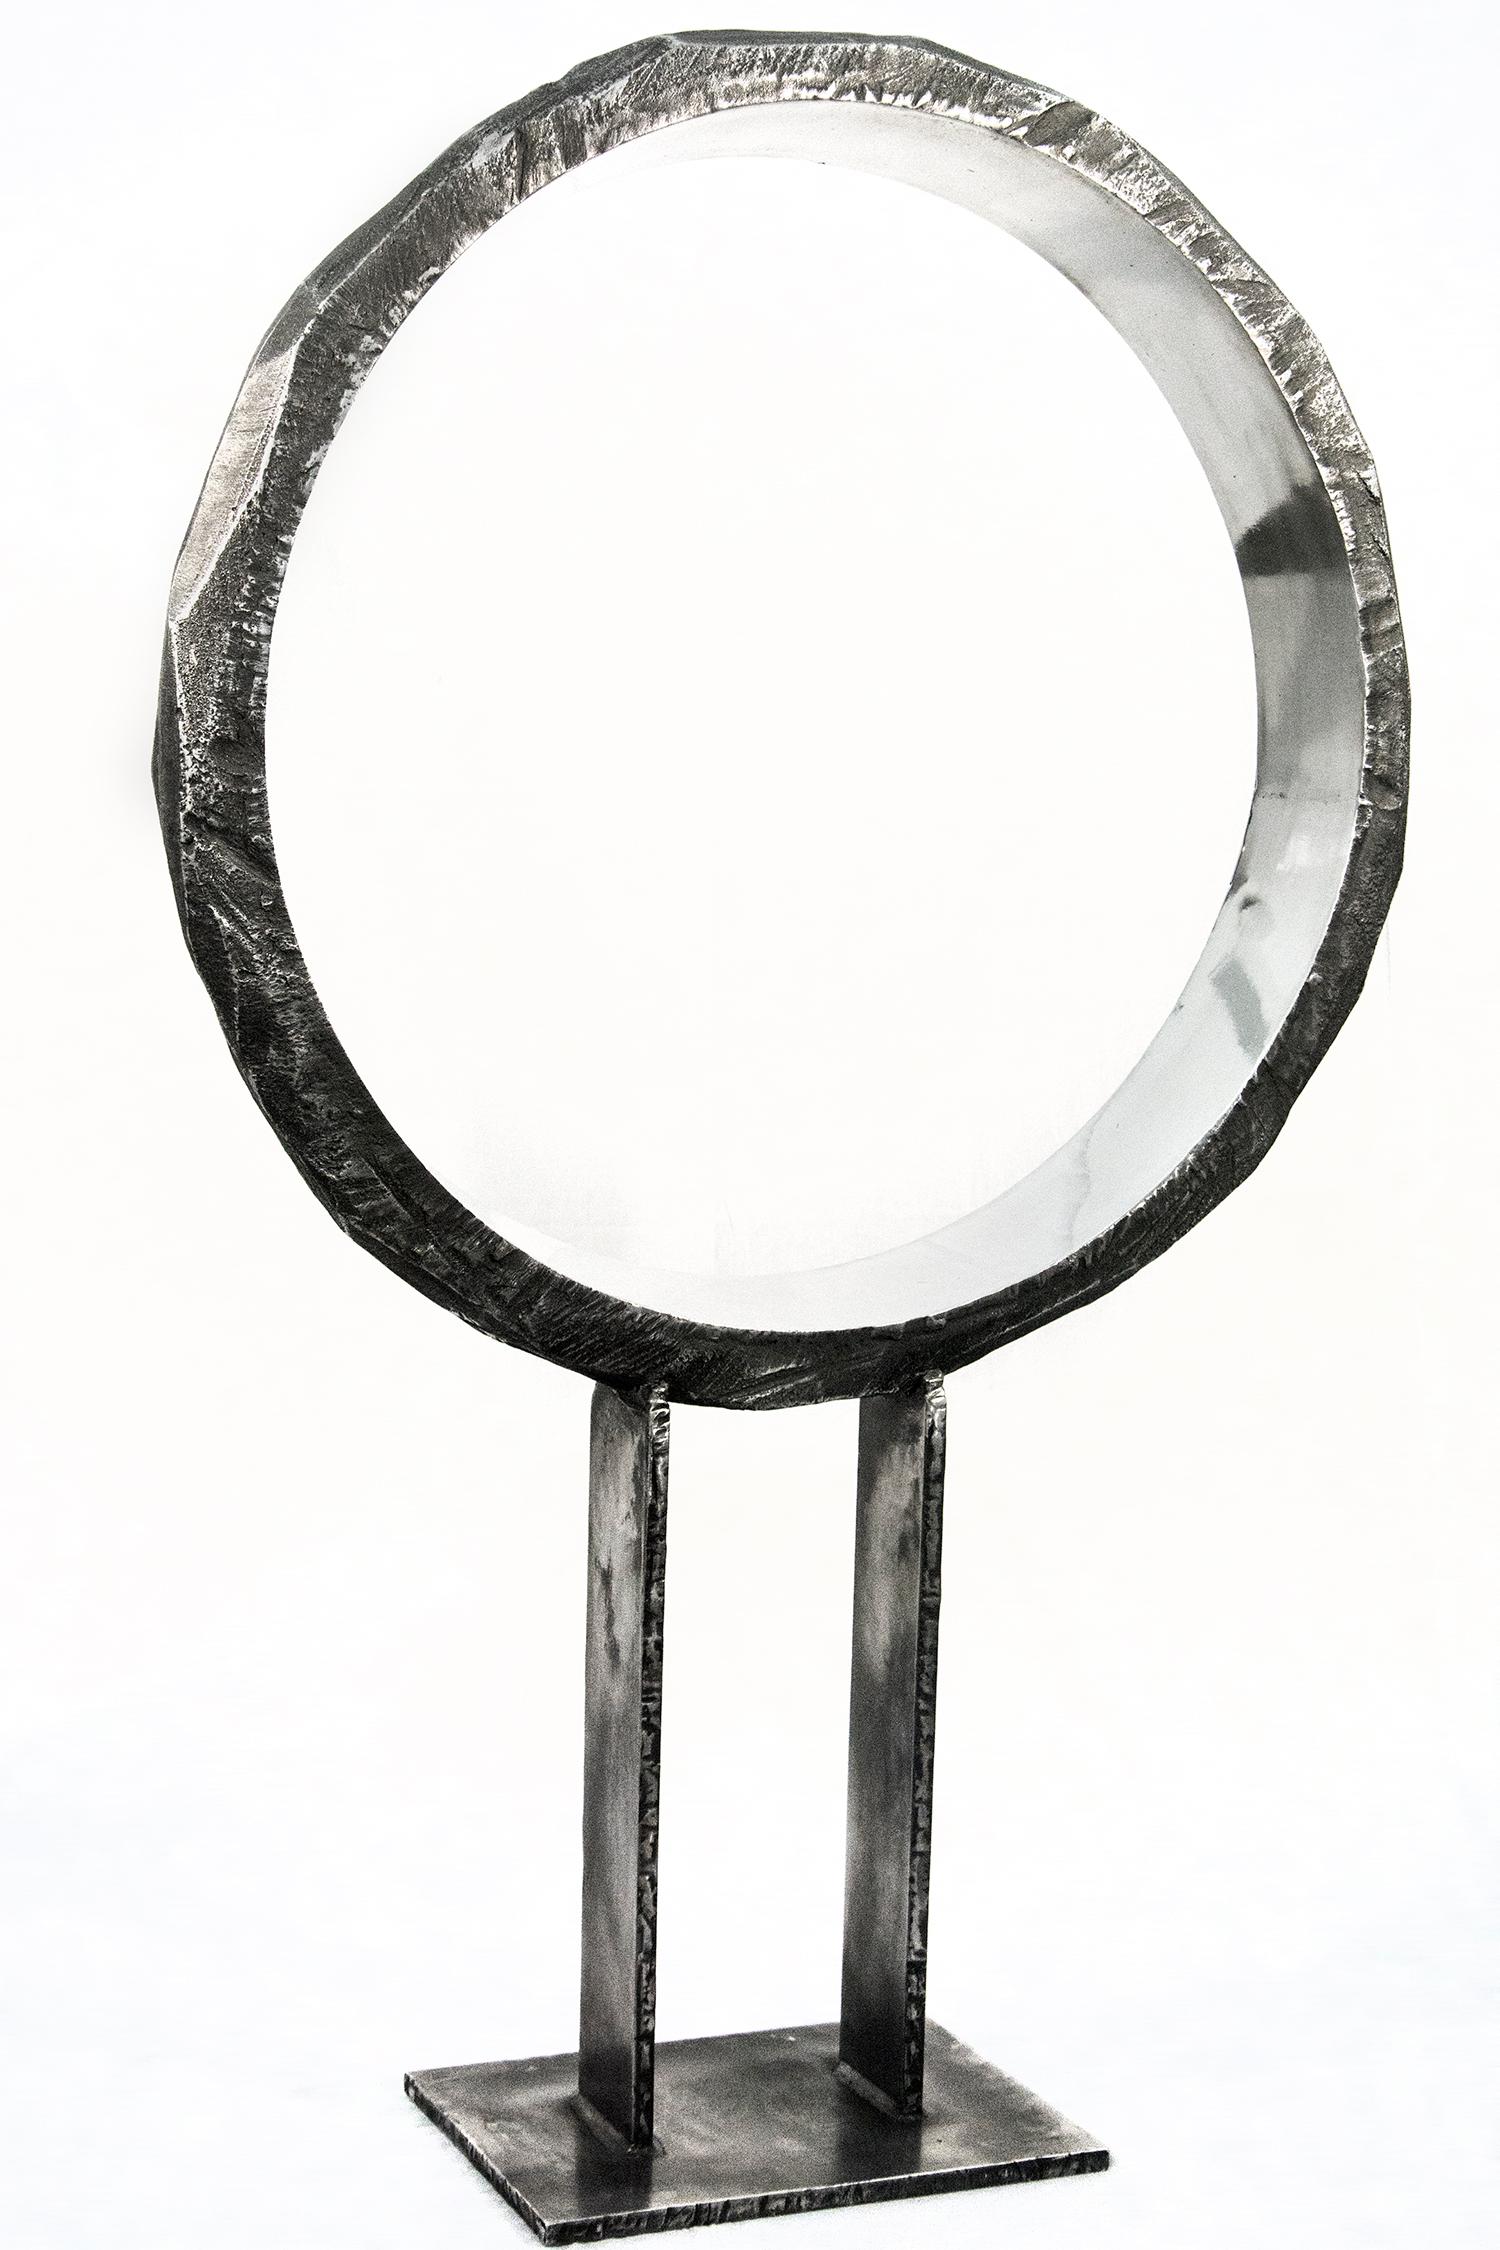 A large cast aluminum ring, polished and reflective on the inside and textured on its exterior elegantly frames the indoor space. Created by Philippe Pallafray and titled 